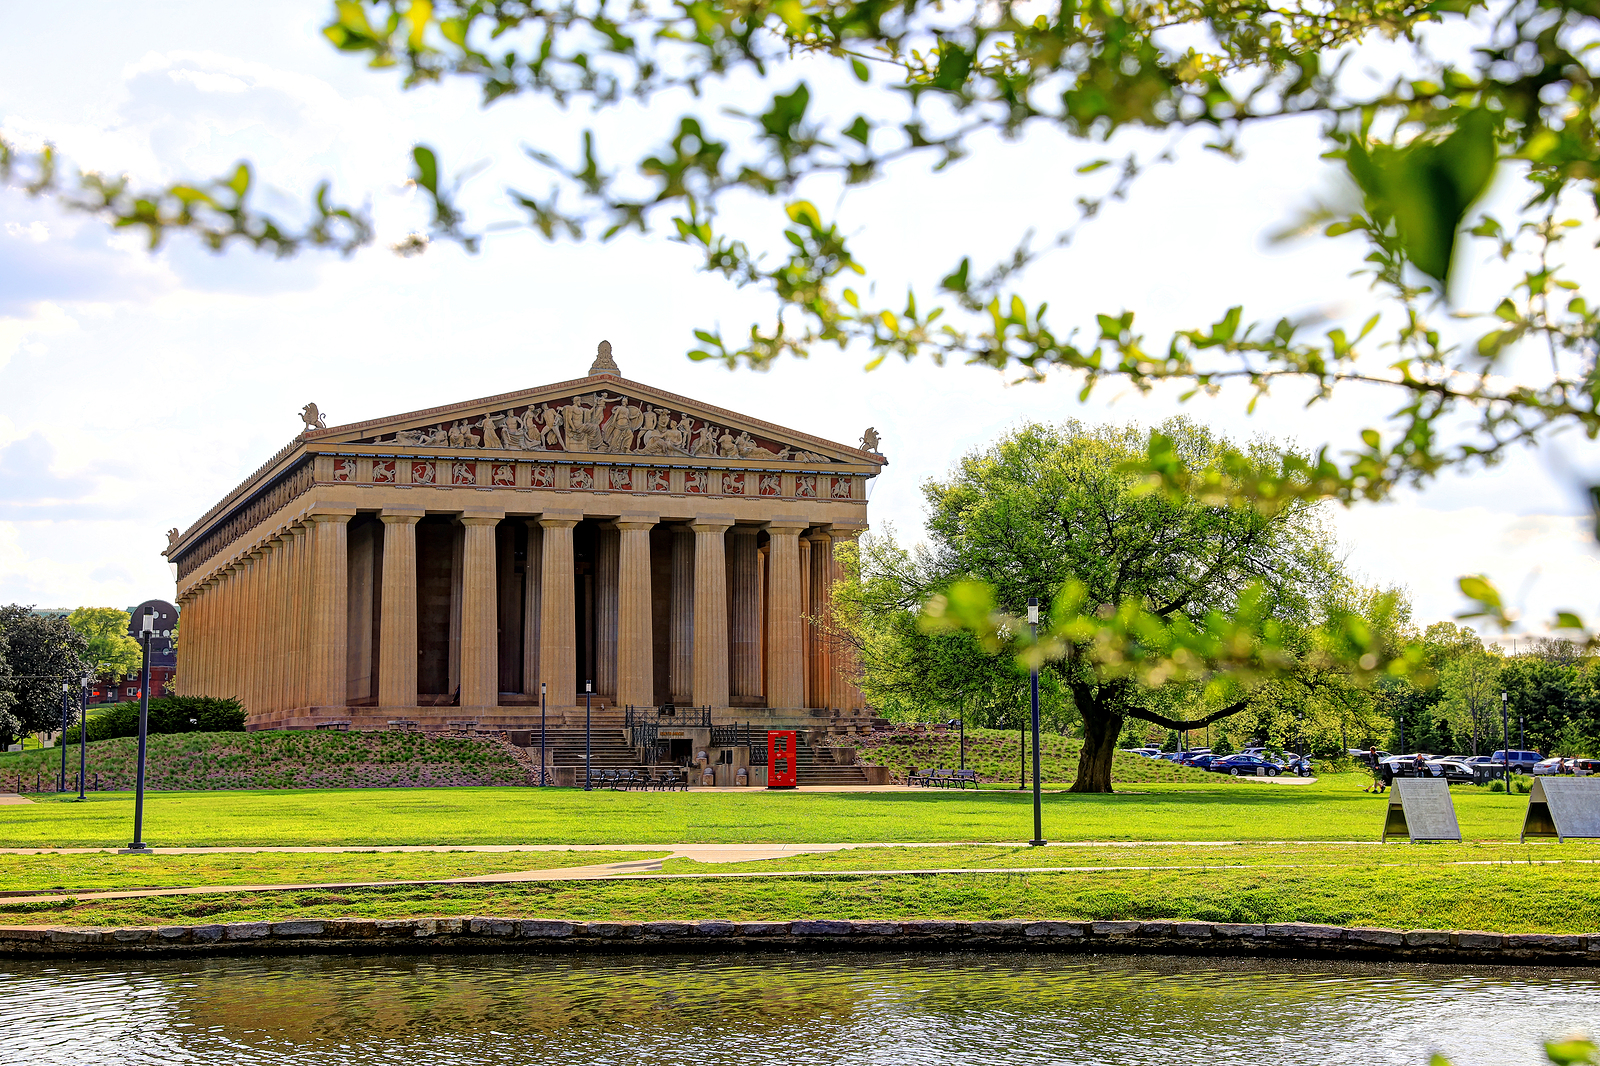 Nashville, Tennessee - April 27, 2018 - The Parthenon in Nashville, Tennessee is a full scale replica of the original Parthenon in Greece. The Parthenon is located in Centennial Park.